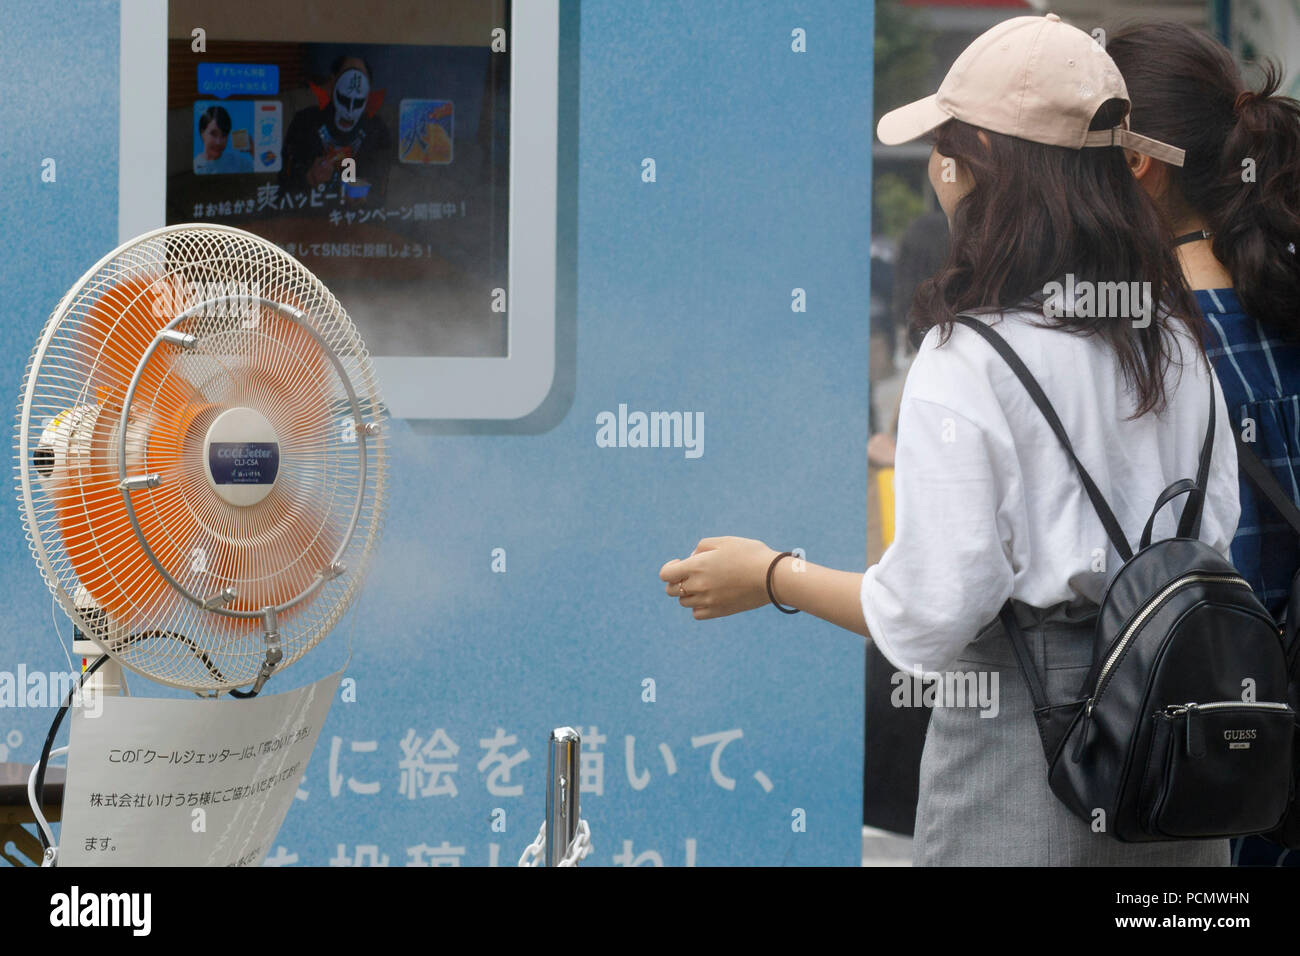 Women stand up in front of a fan to cool themselves off on August 3, 2018, in Tokyo, Japan. Temperatures topped 37 degrees Celsius in Tokyo, on Friday at 2 pm. According to the Tokyo Medical Examiner's Office, ninety-six people died of heatstroke in central Tokyo's 23 wards during the month of July, nearly four times as many as in the same period in 2017. Credit: Rodrigo Reyes Marin/AFLO/Alamy Live News Stock Photo